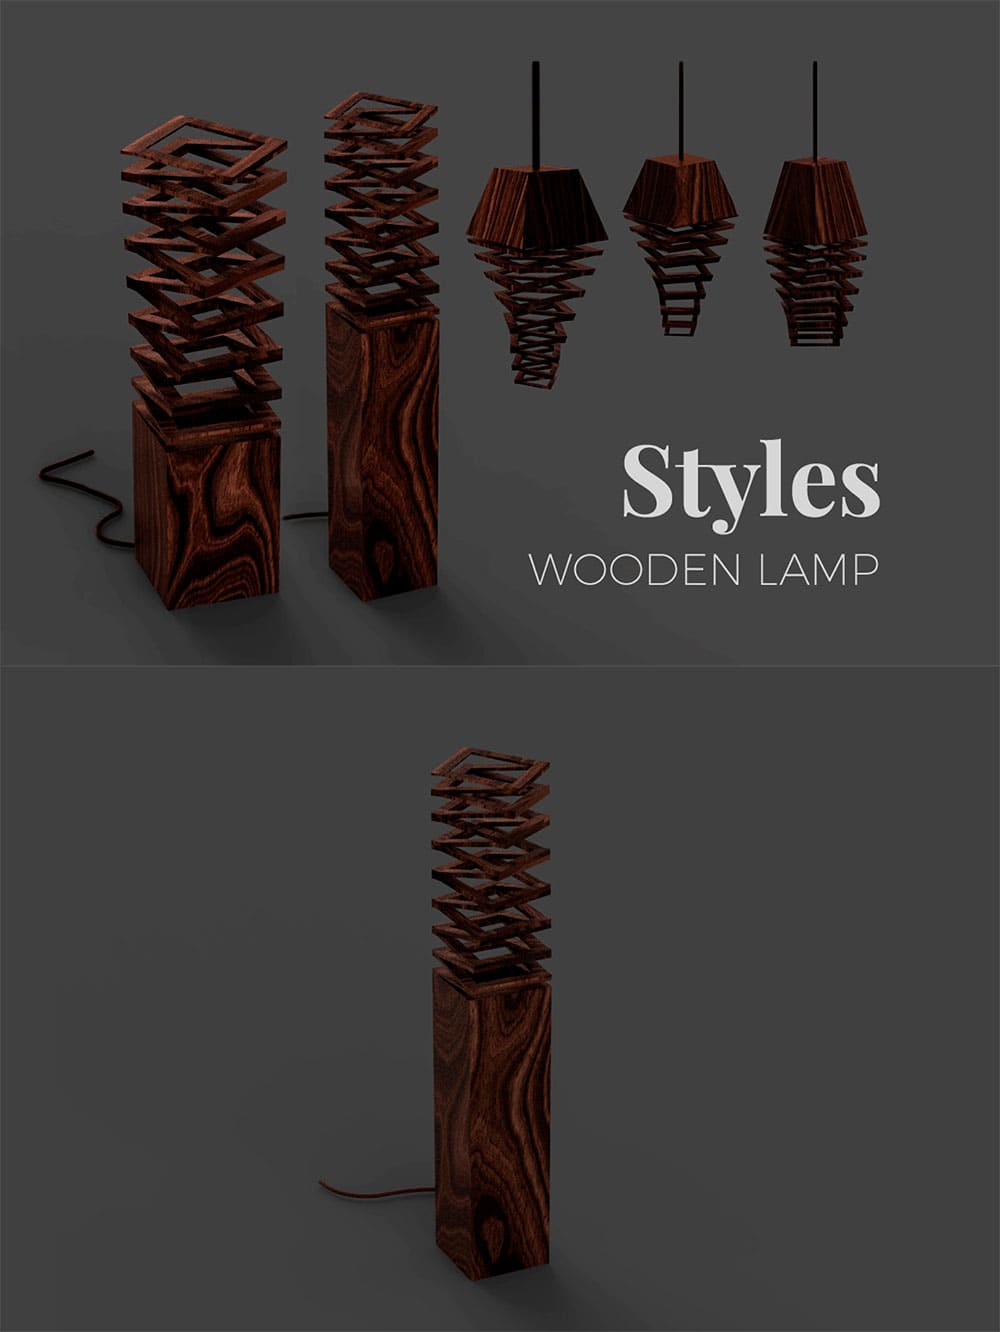 Styles wooden lamp, picture for pinterest.